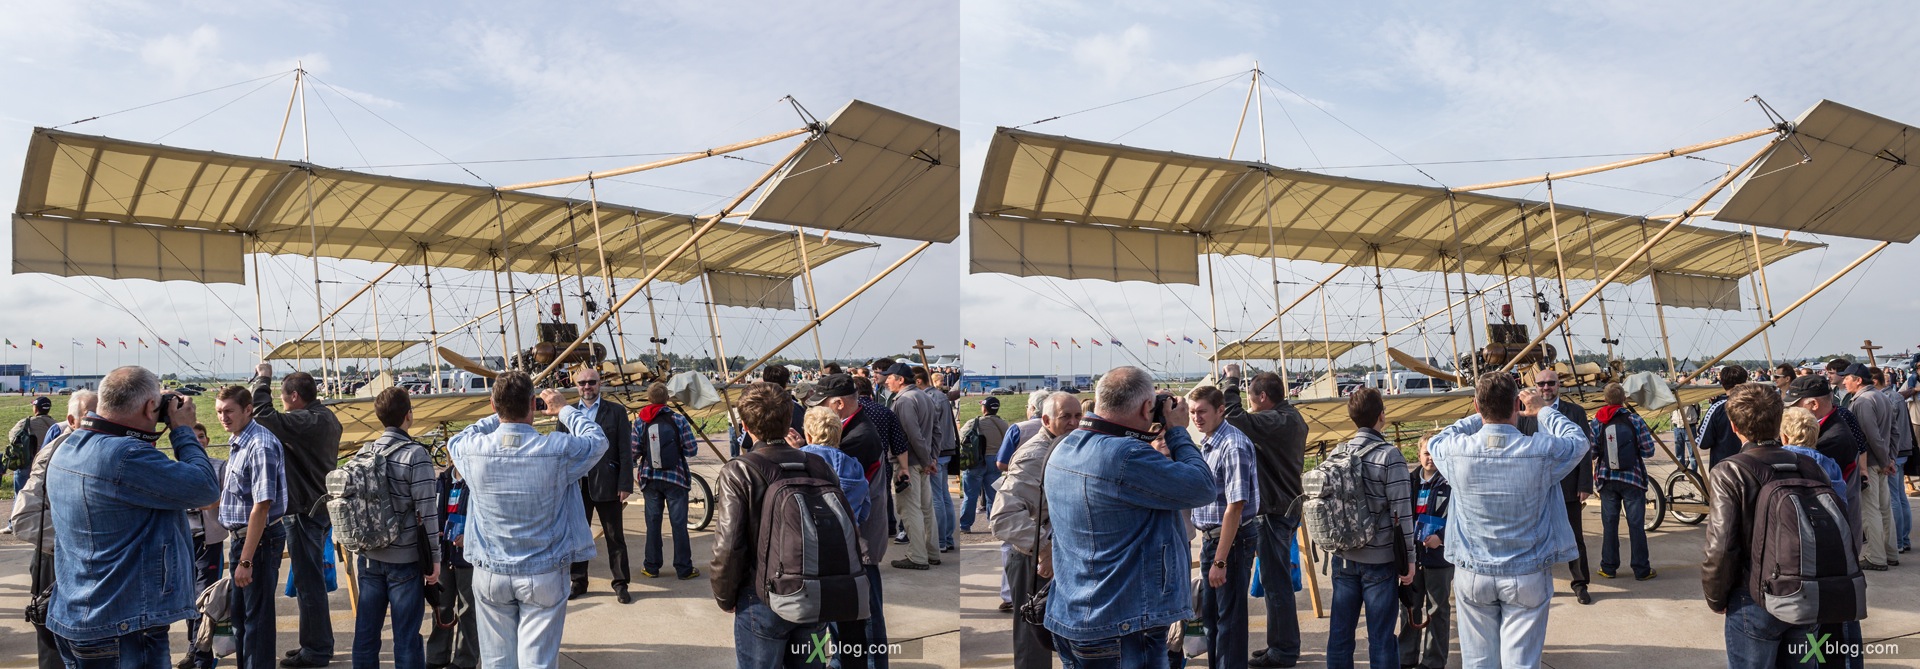 2013, old ancient airplane, MAKS, International Aviation and Space Salon, Russia, Ramenskoye airfield, airplane, 3D, stereo pair, cross-eyed, crossview, cross view stereo pair, stereoscopic